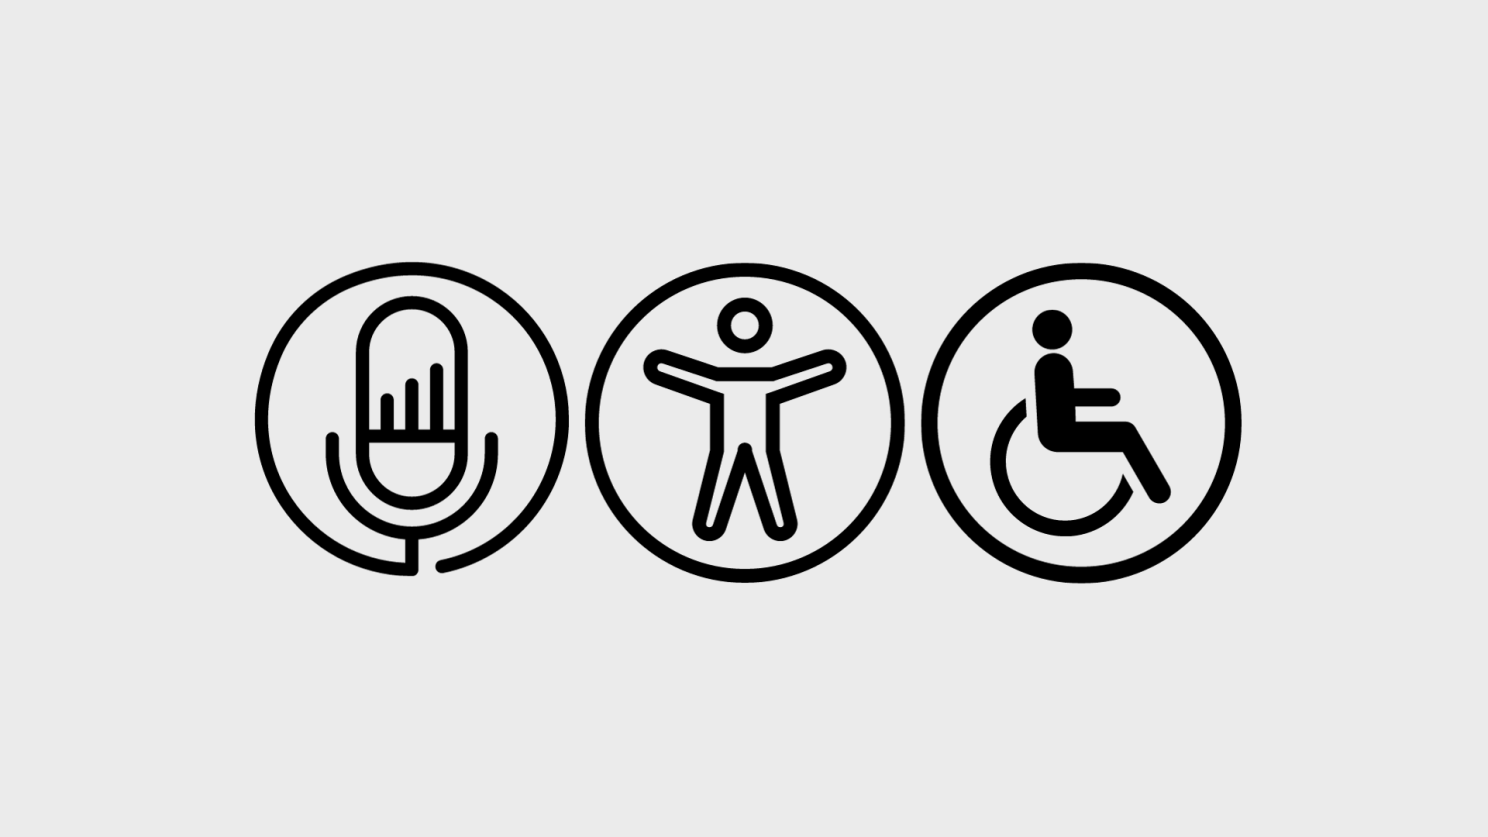 Recruitment within Digital Accessibility – by Joe James, Digital Accessibility Recruitment Consultant